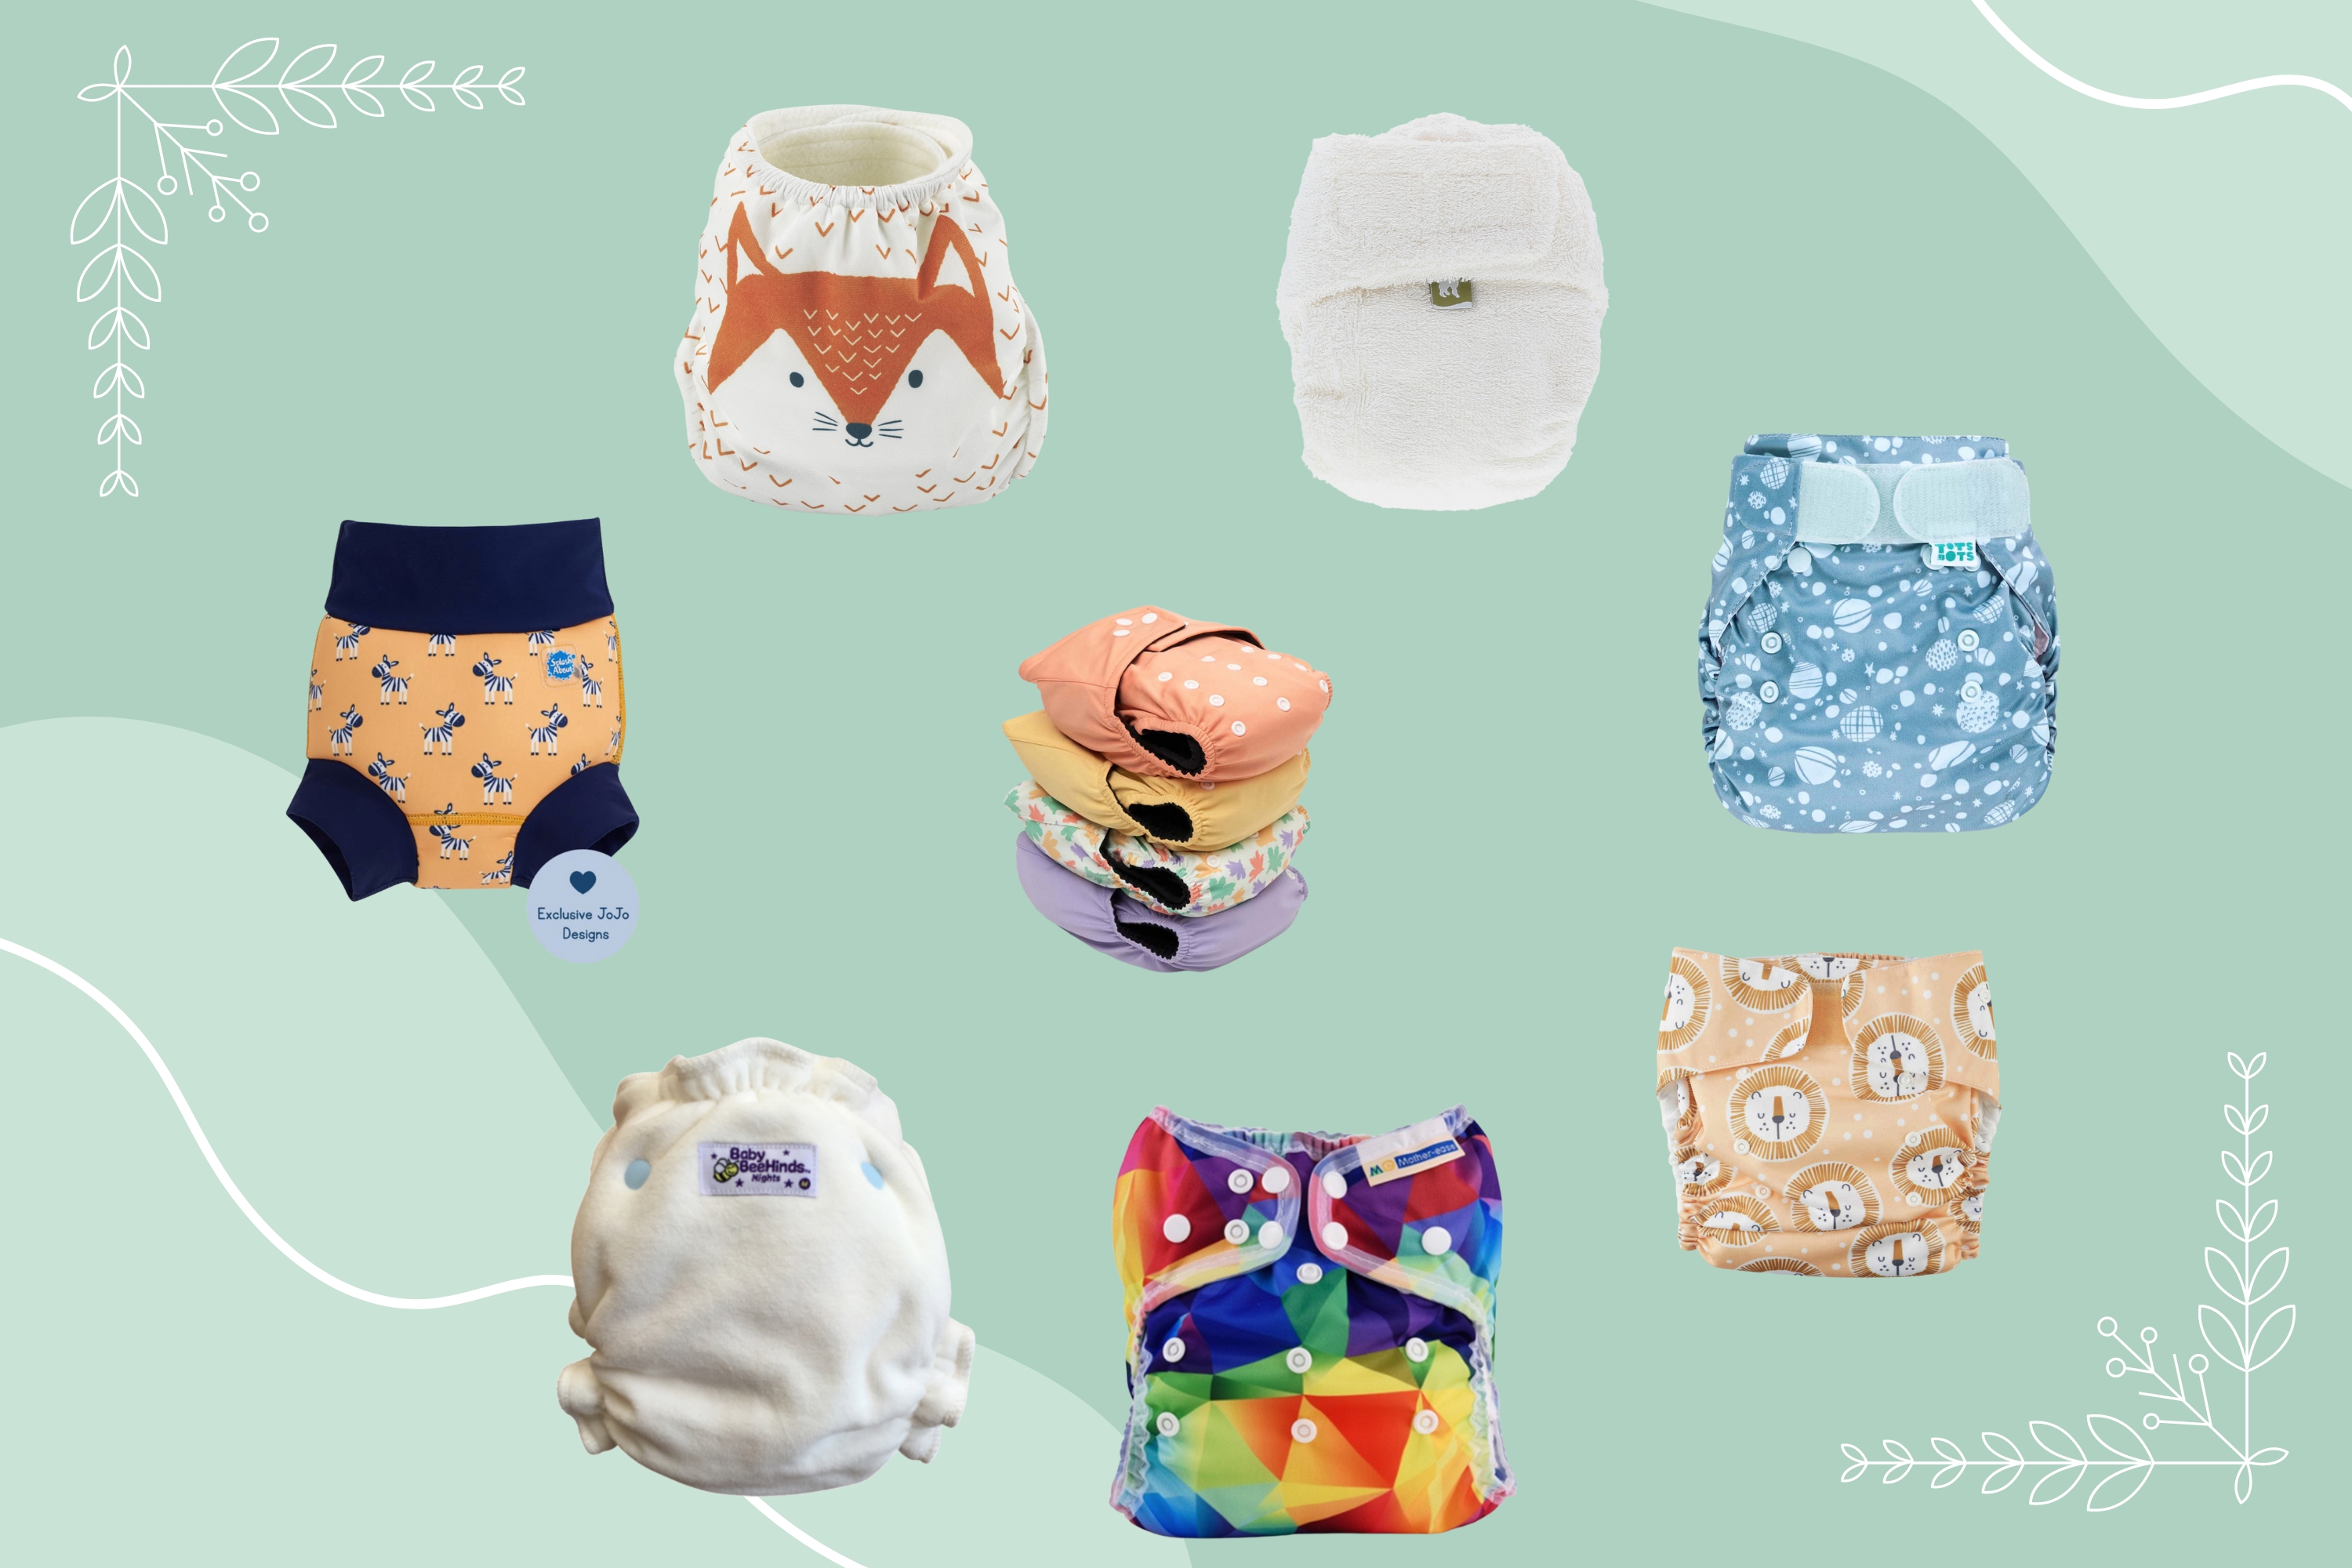 Best reusable nappies of 2023